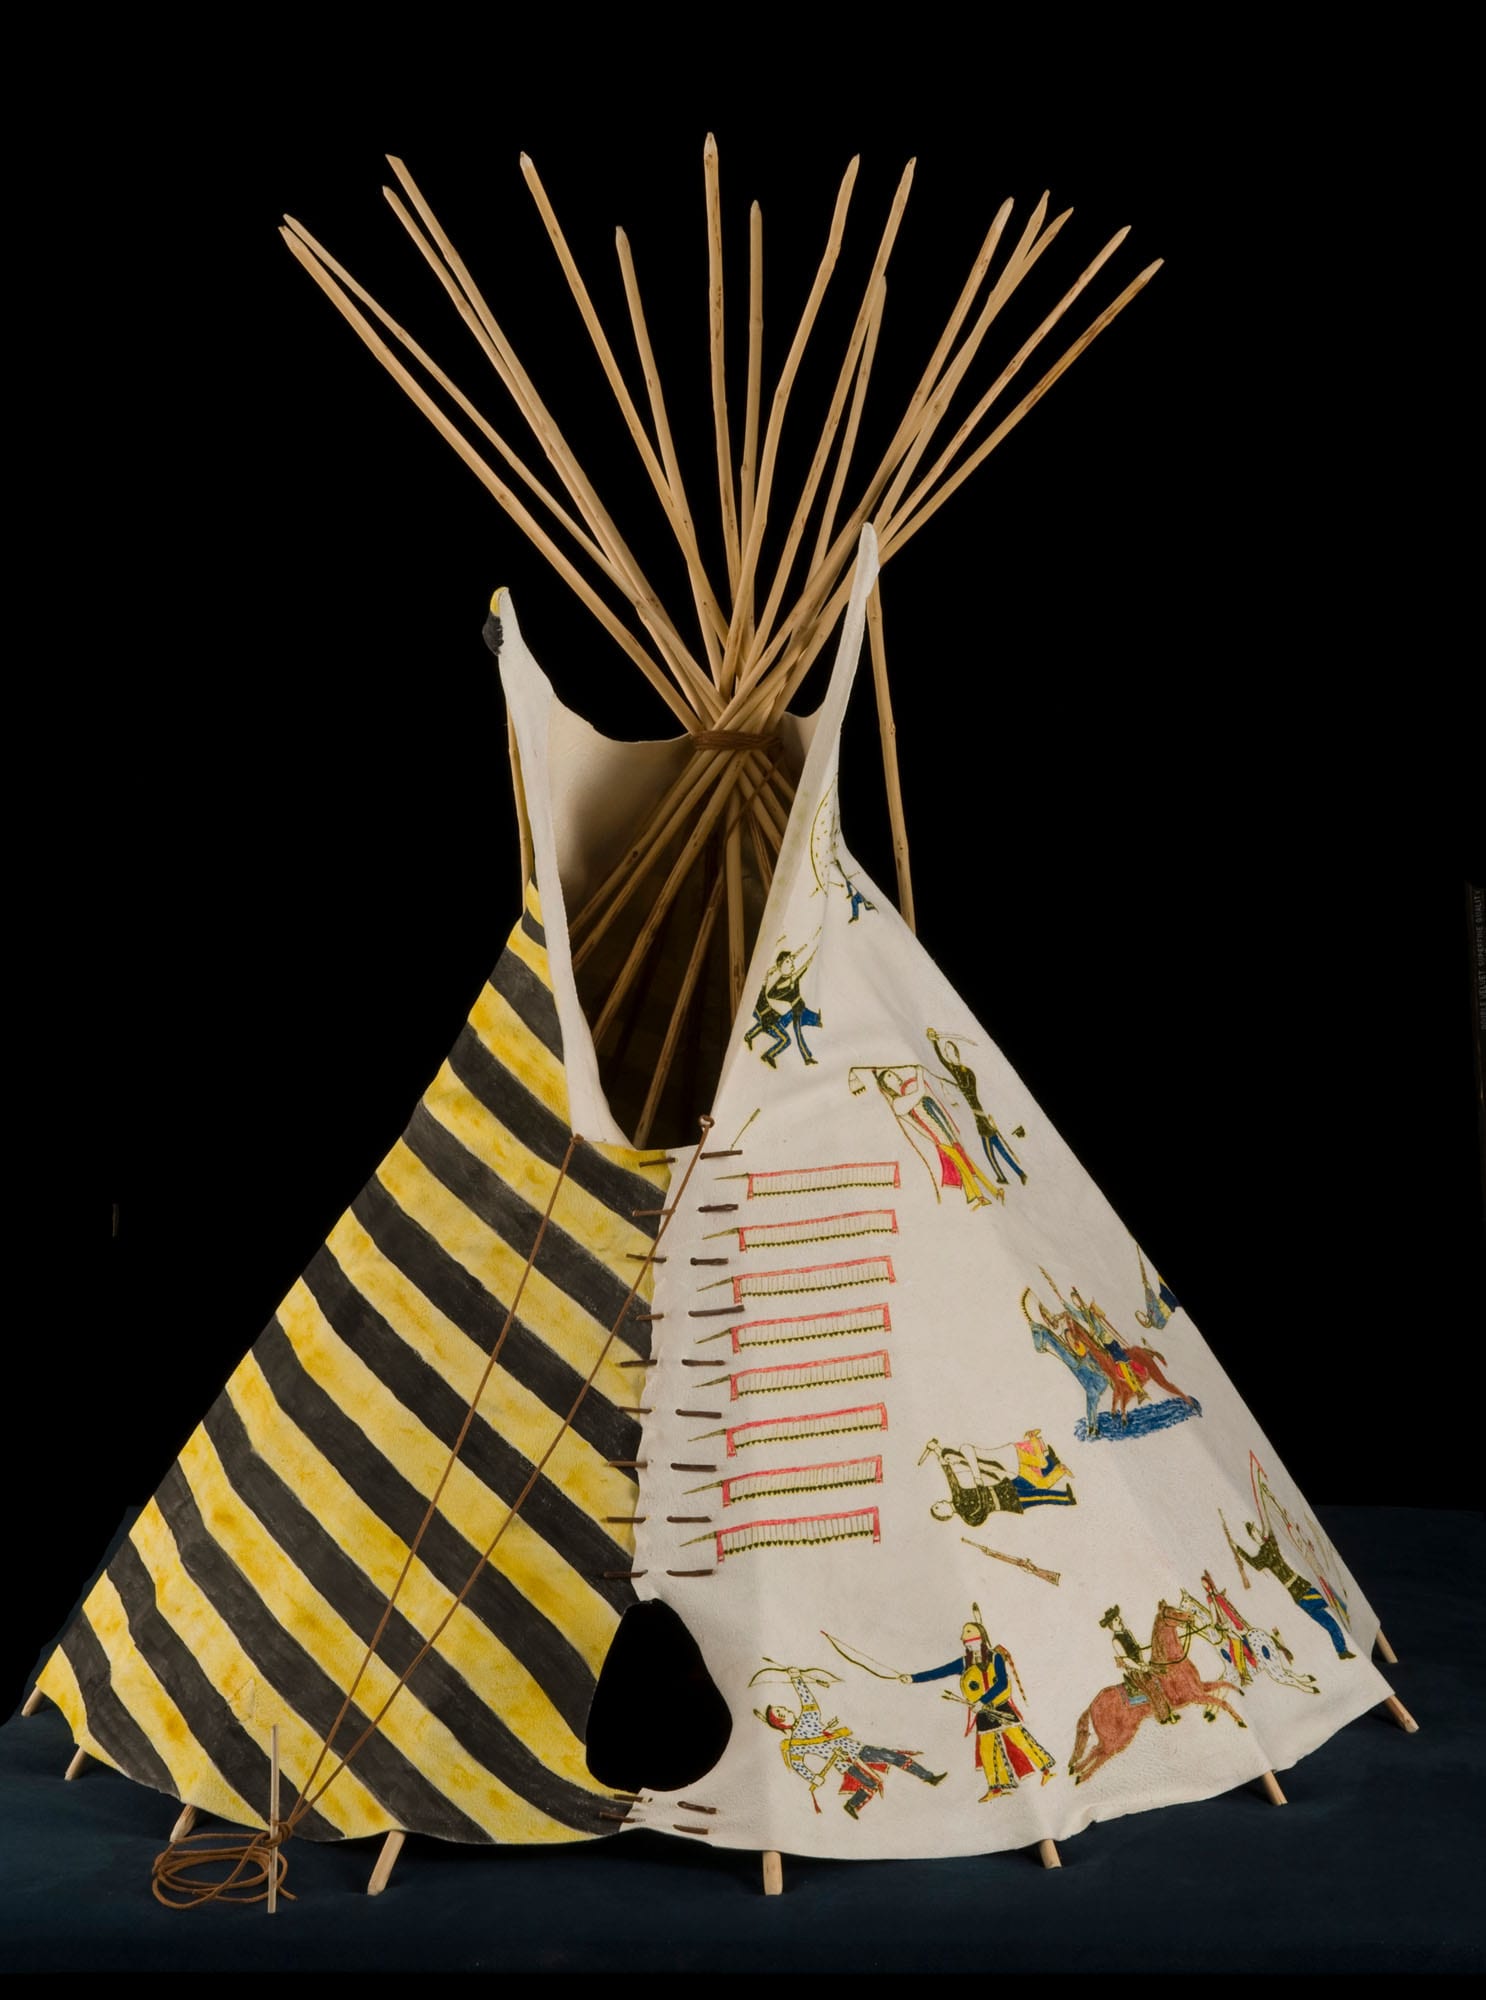 Tipi Model National Cowboy And Western Heritage Museum